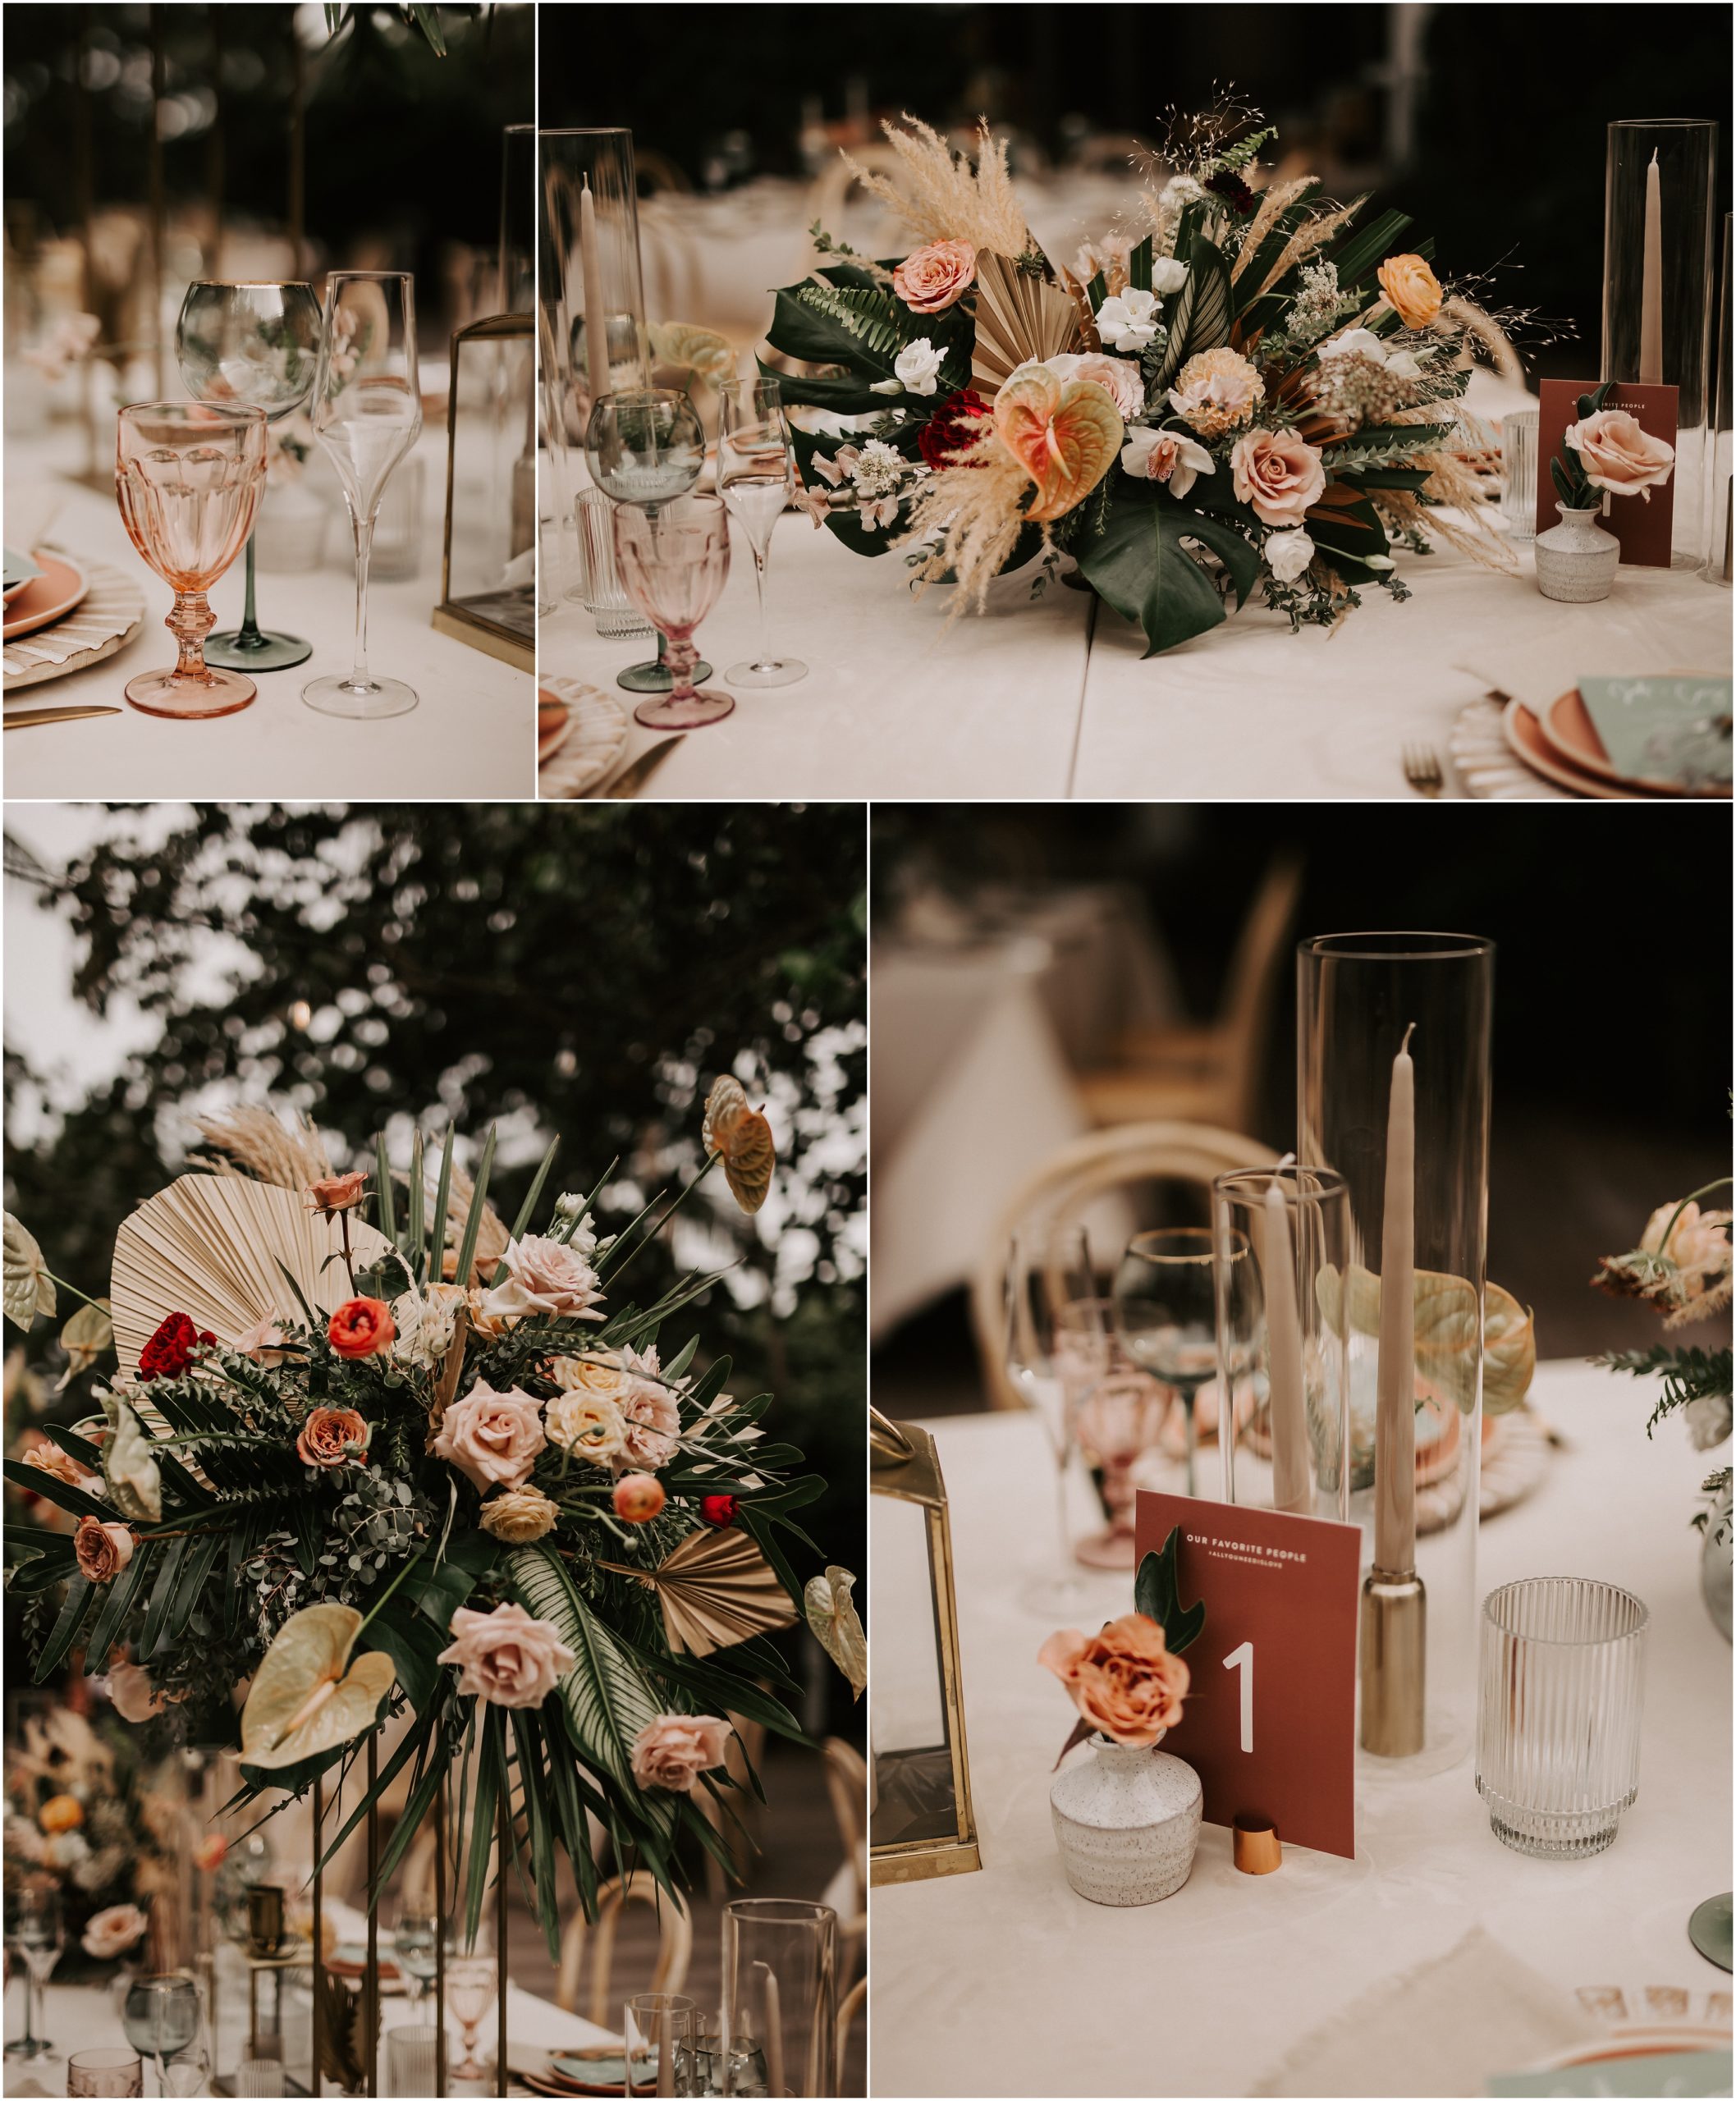 The guest tables featured terracotta plates and tall floral centerpieces. The design plays with the different color tones of this wedding, which creates a vibrant visual effect!